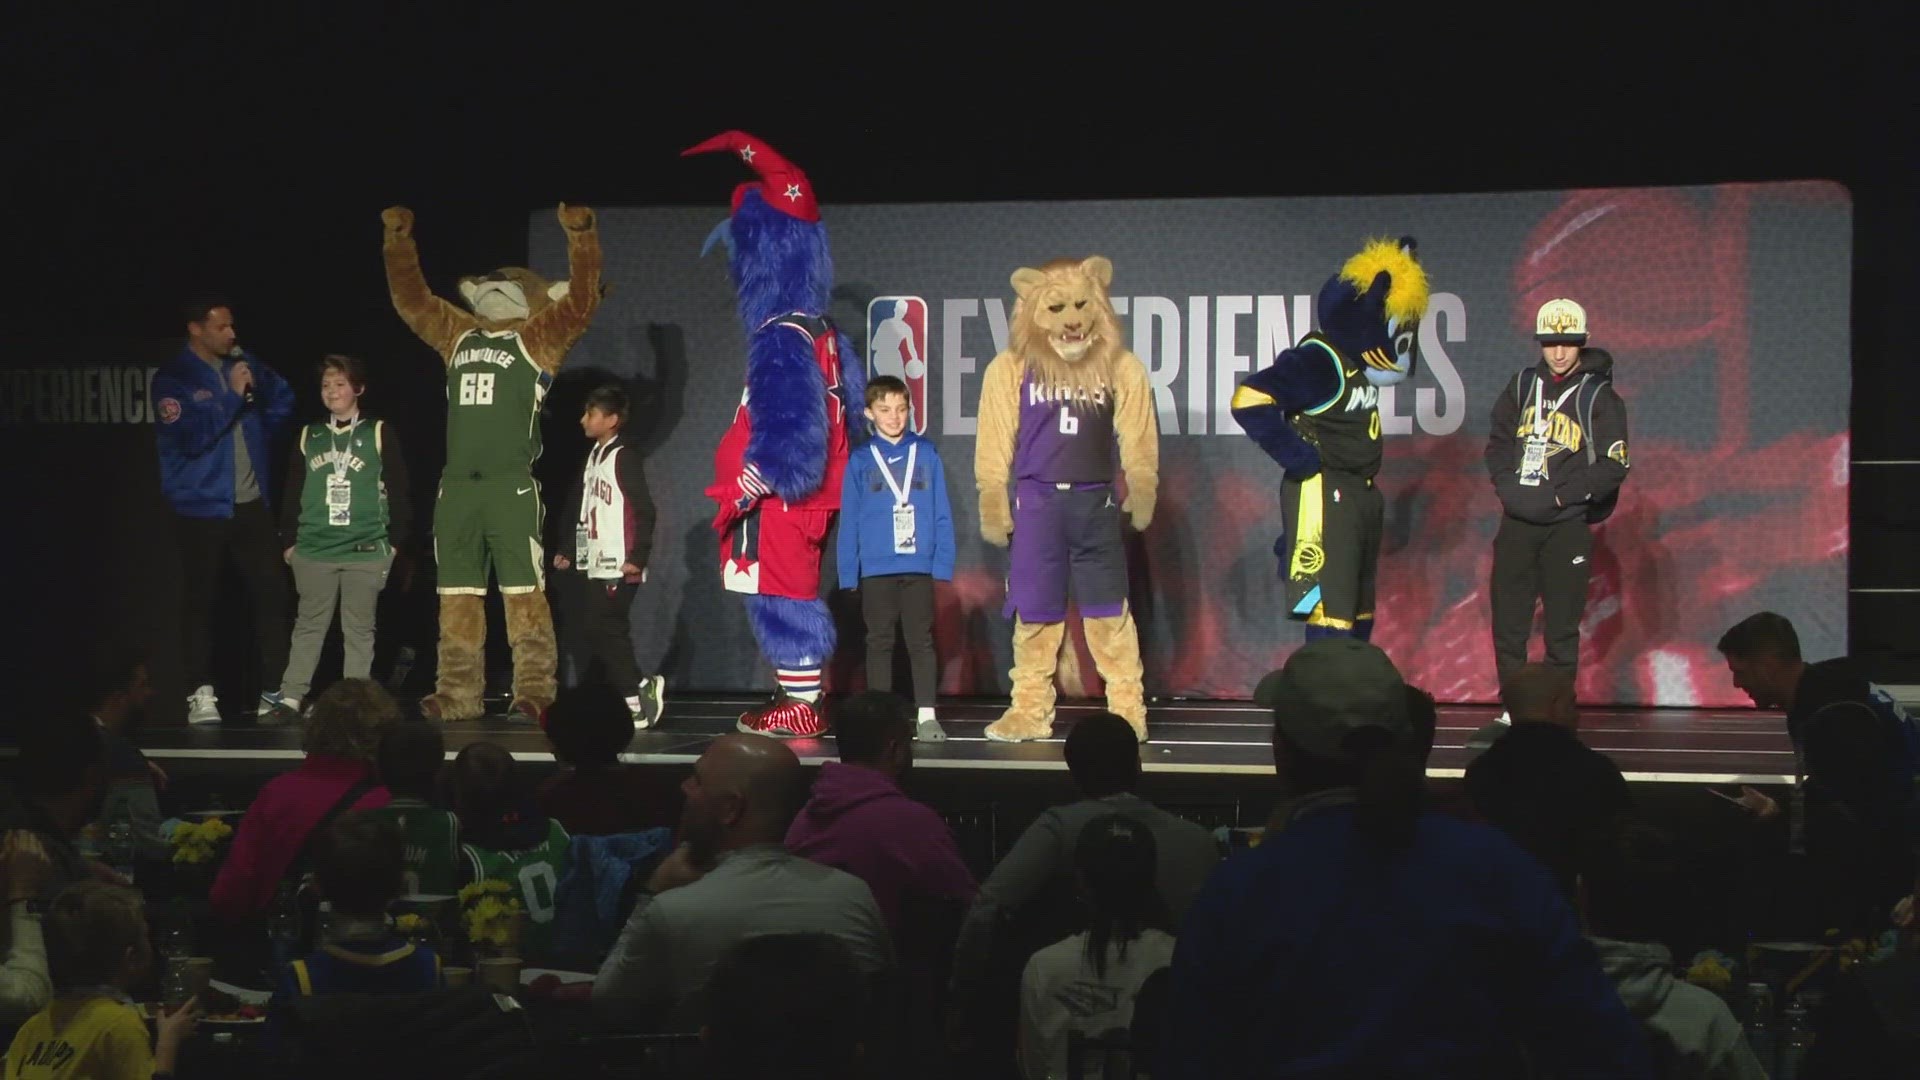 NBA Mascots and children had an enjoyable experience Saturday morning.